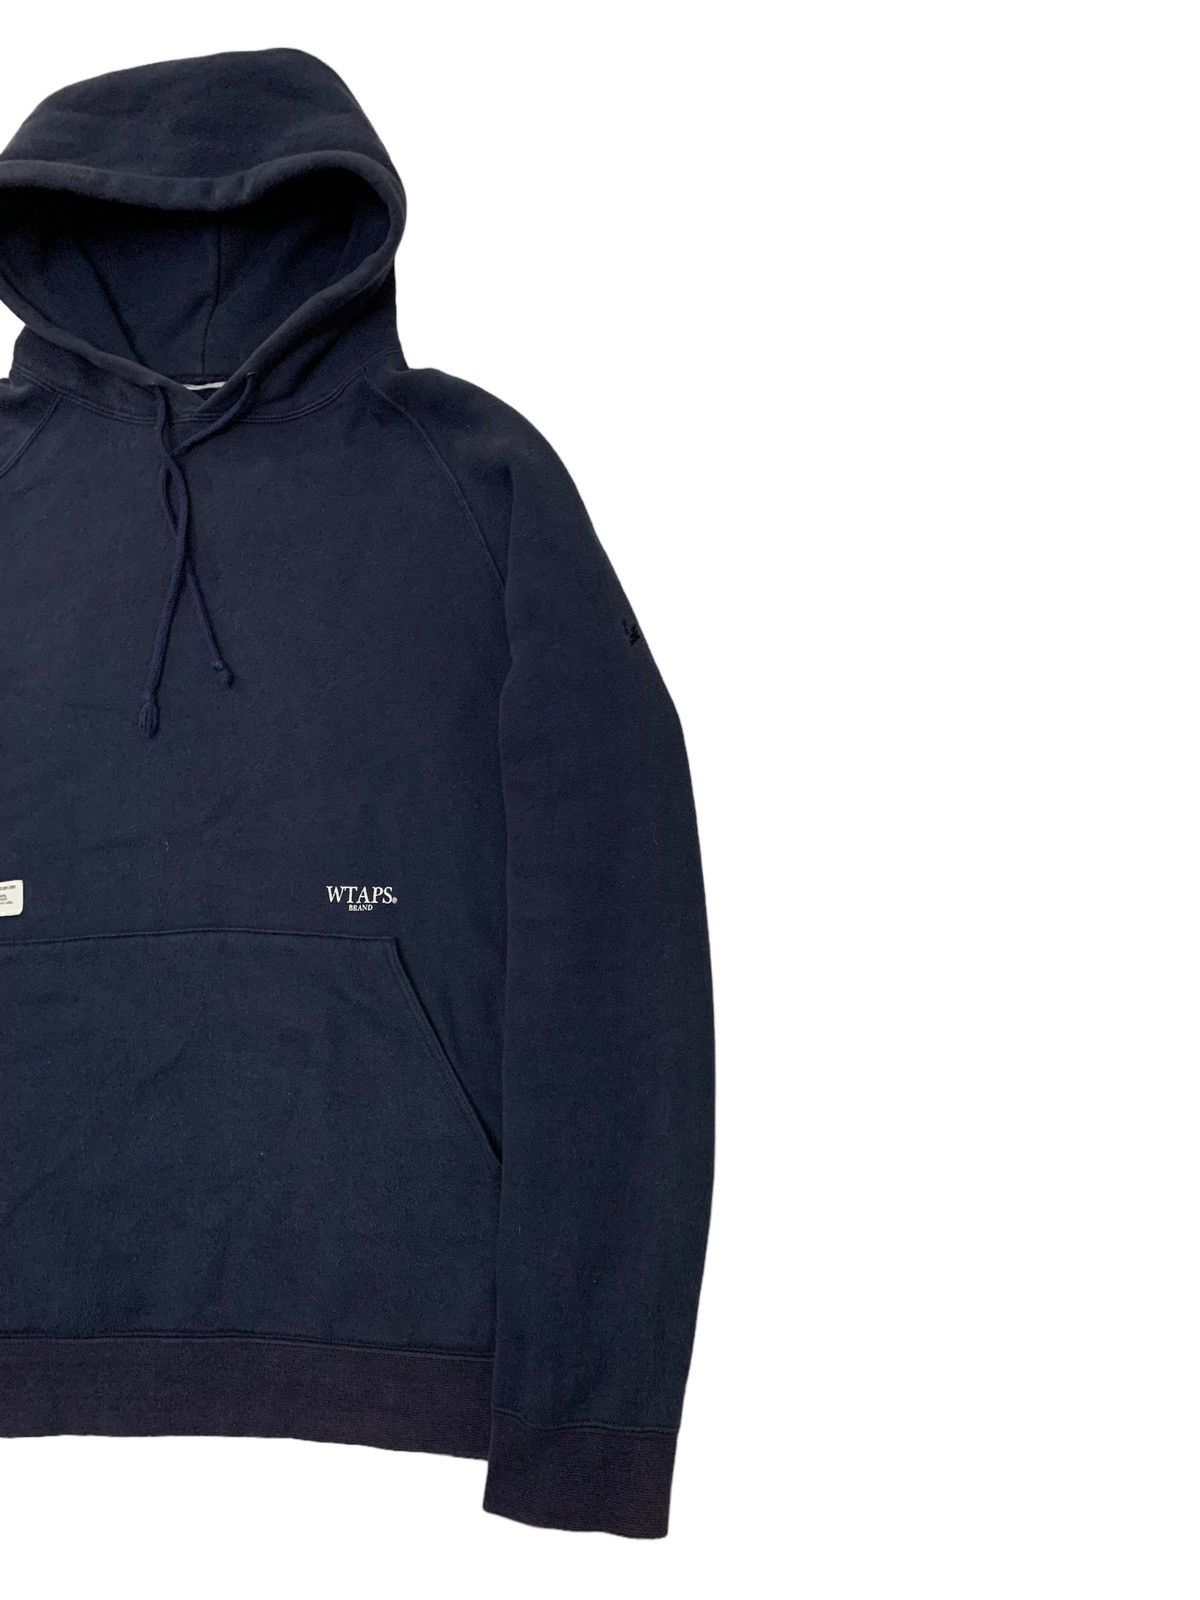 🔥WTAPS NAVY PULLOVER HOODIE - 7